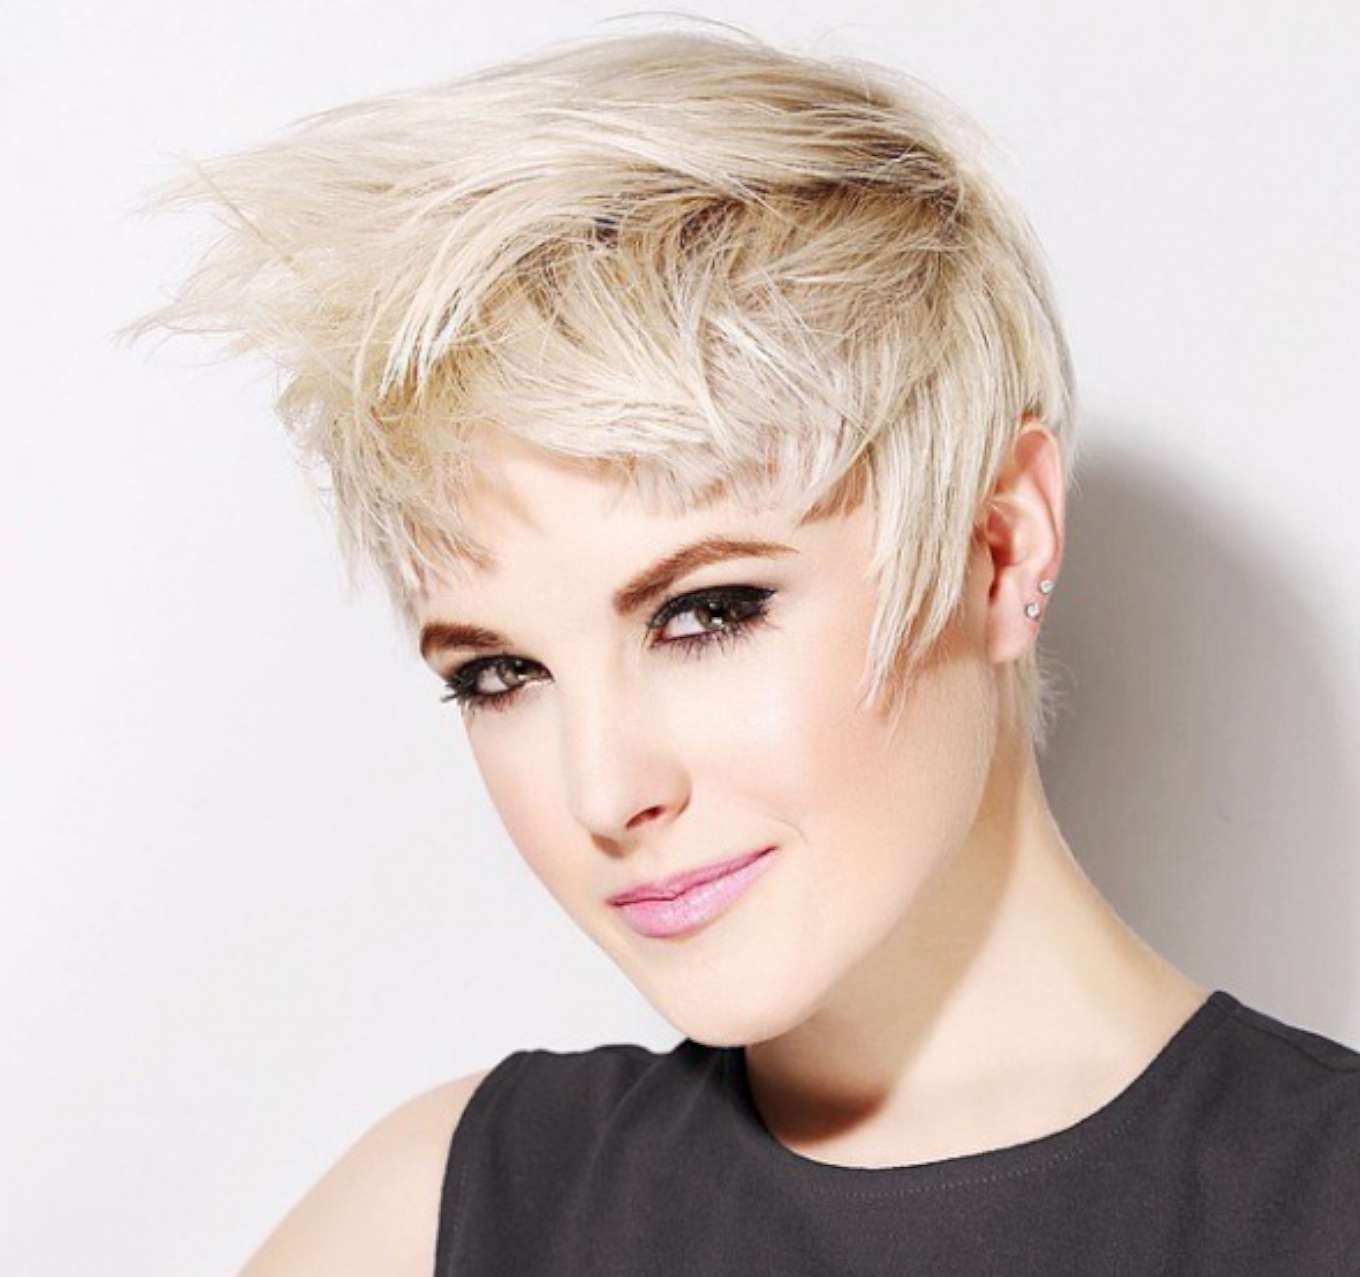 Short Hairstyles For Women - 1